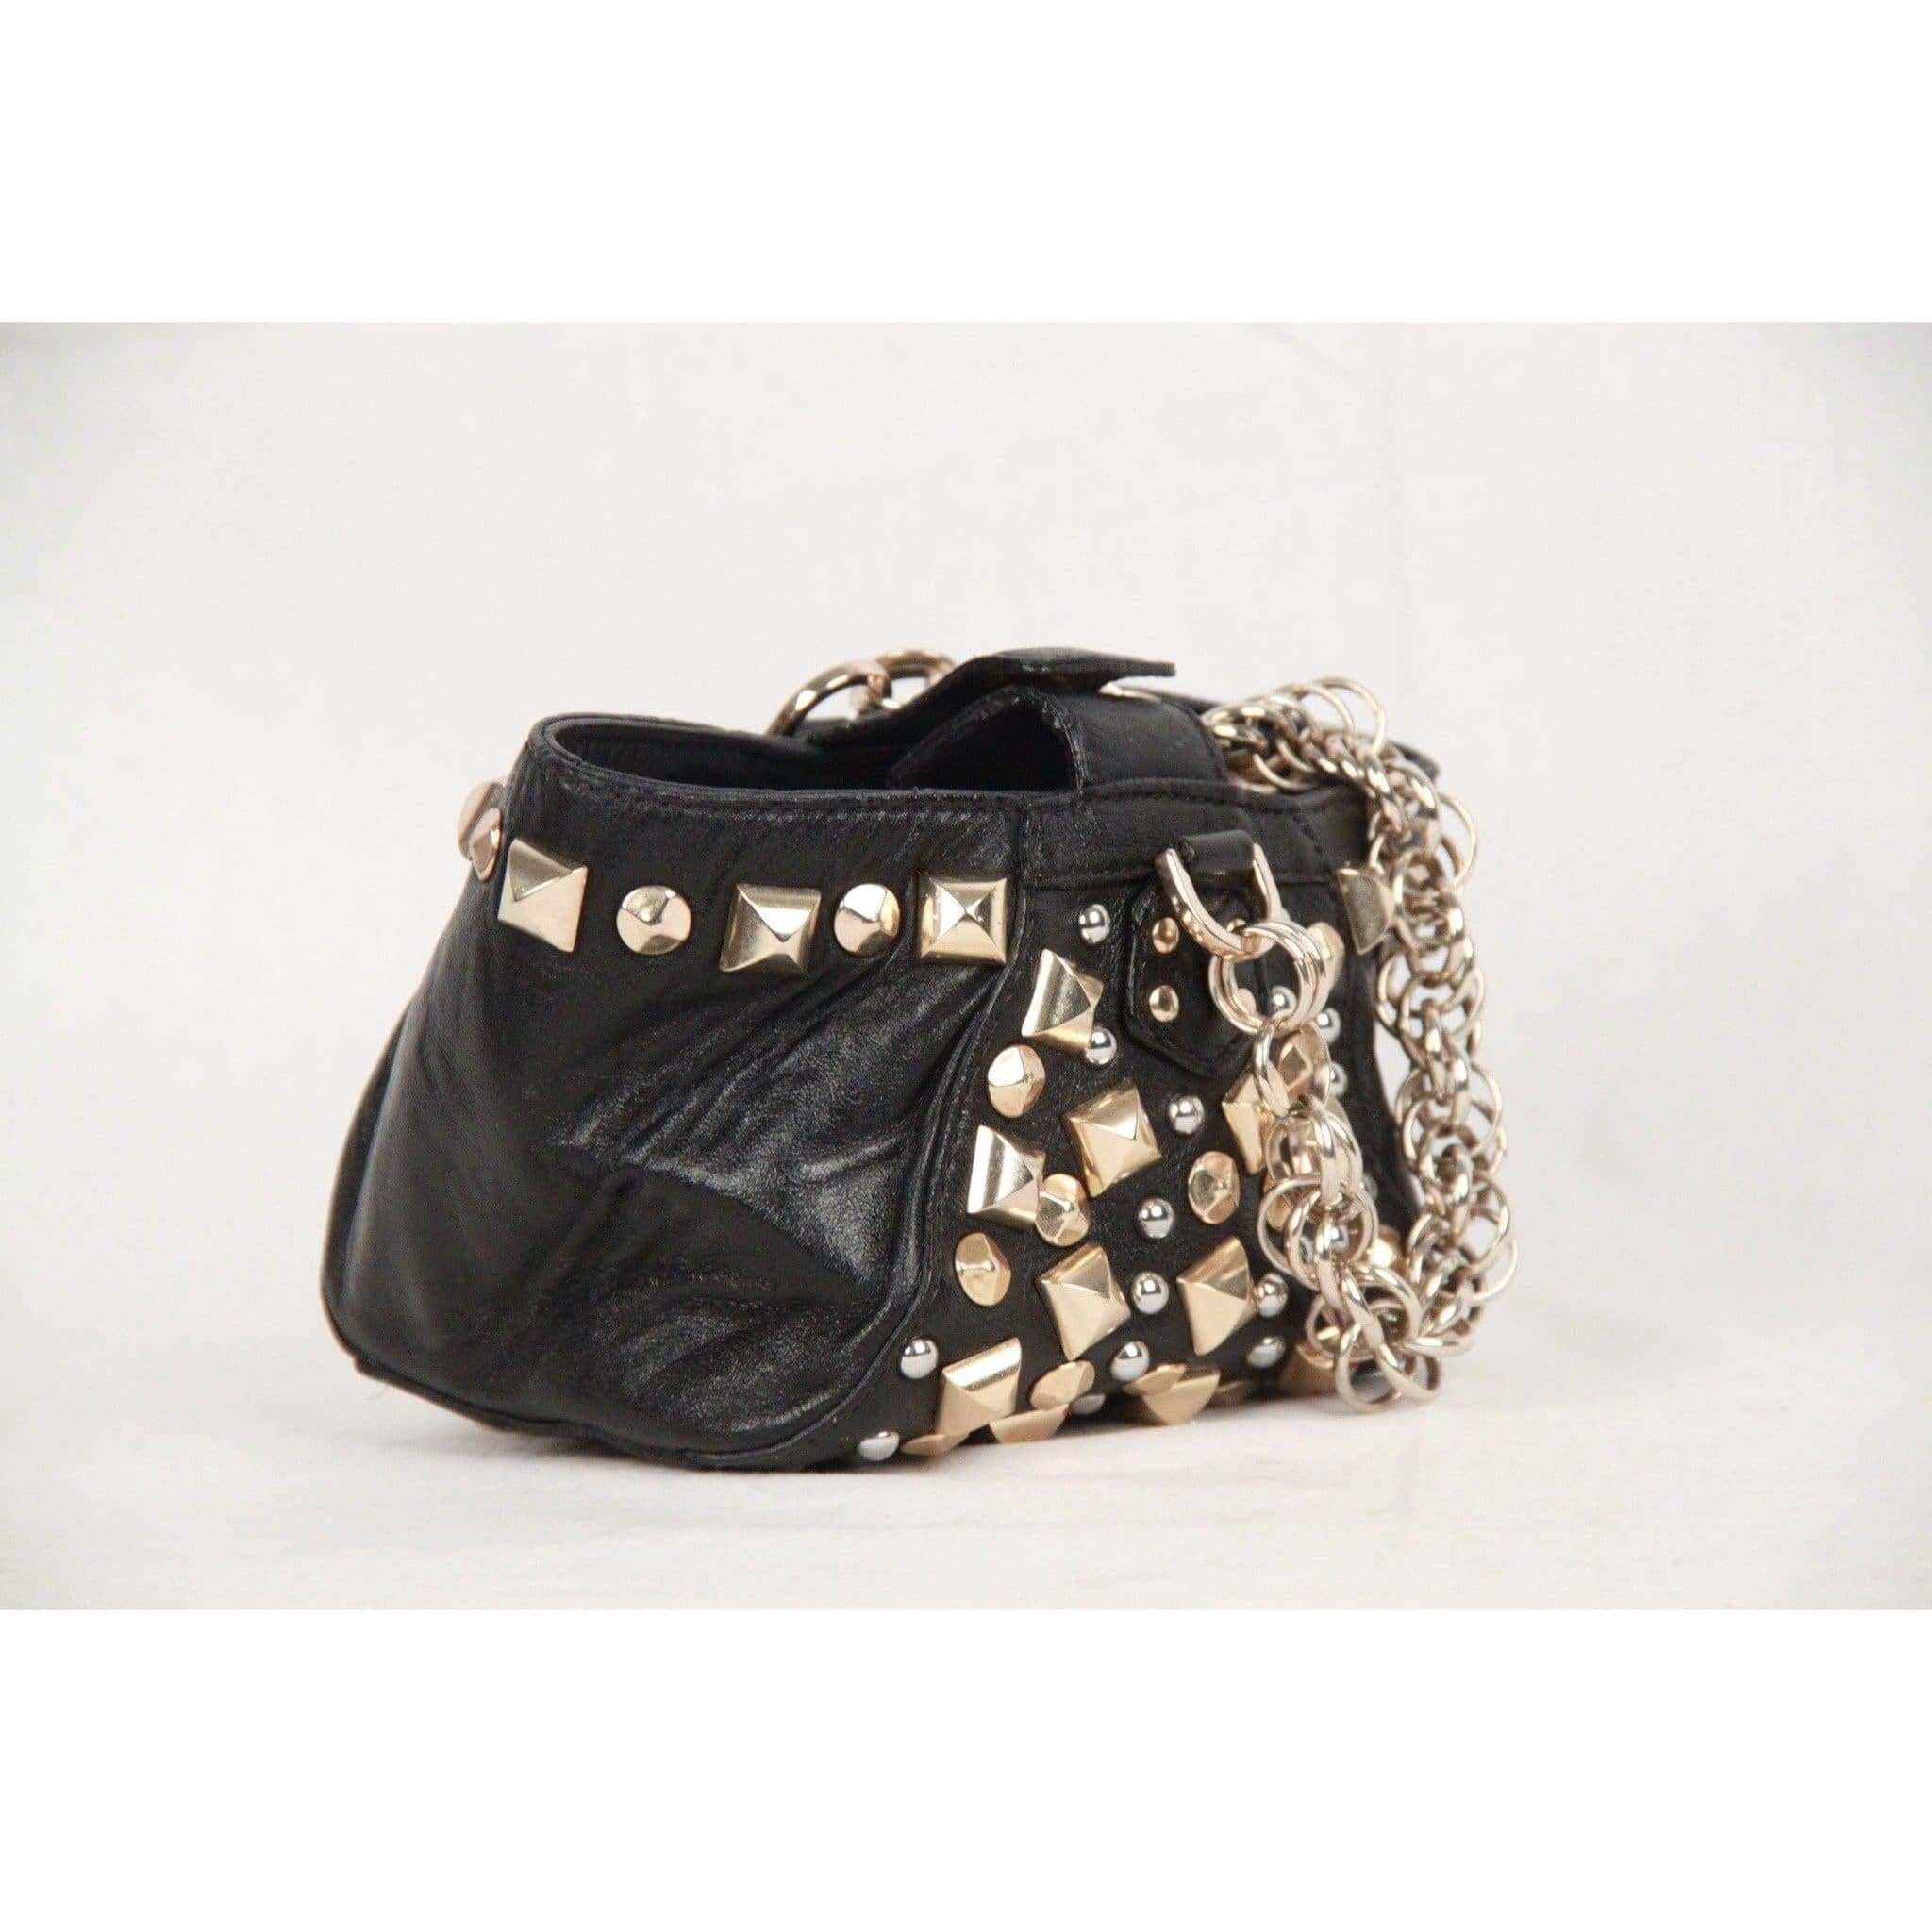 MATERIAL: Leather COLOR: Black MODEL: Mini Bag GENDER: For Her SIZE: Extra-Small Condition B :GOOD CONDITION - Some light wear of use - Some normal wear of use on bottom corners Measurements BAG HEIGHT: 4 Inches - 10,2 cm BAG LENGTH: 7.25 inches -